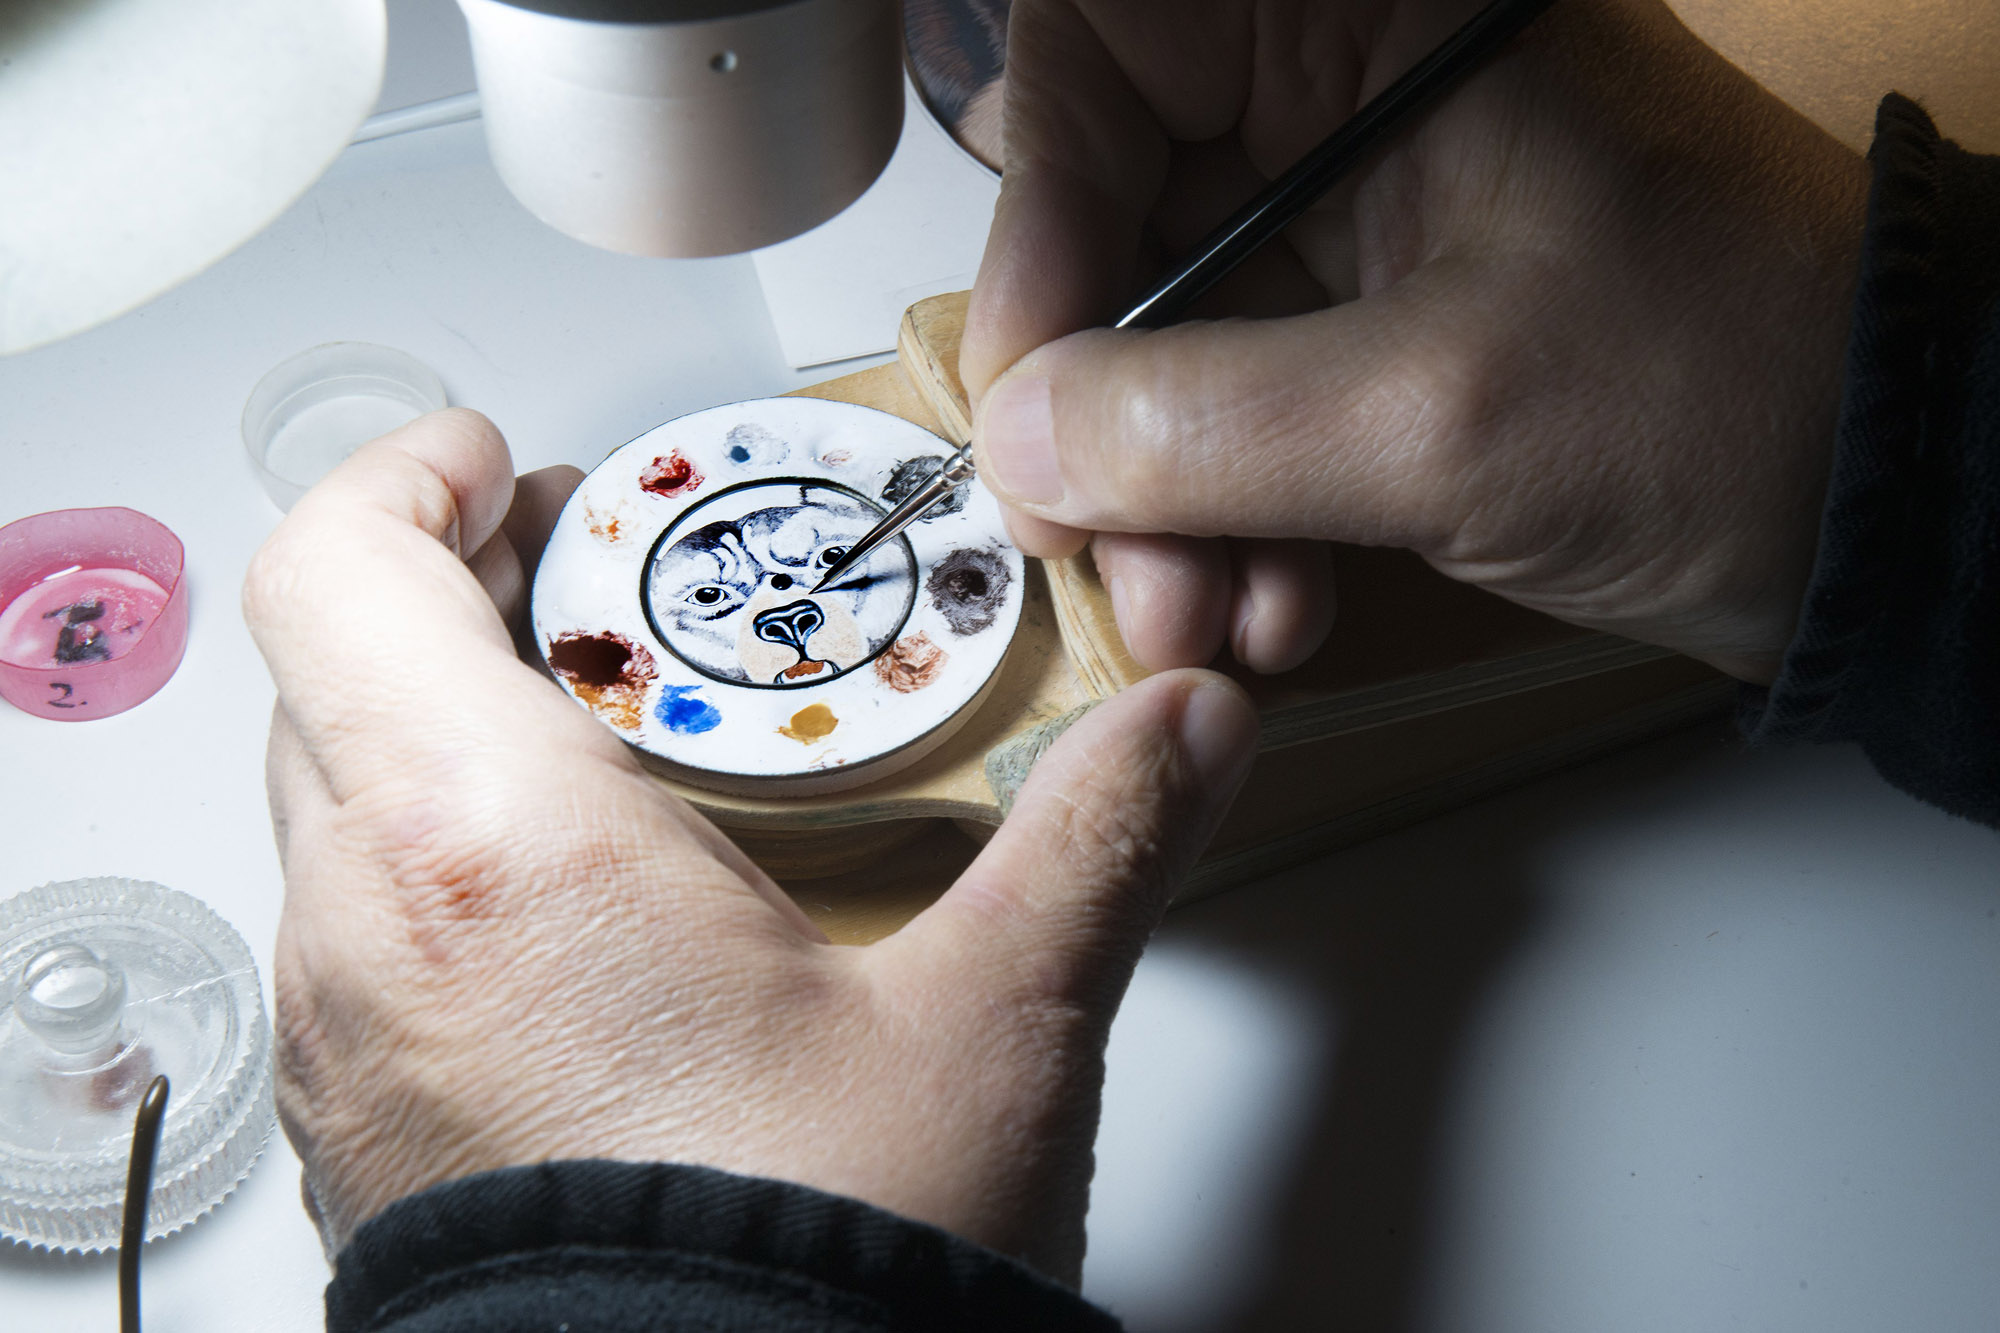 With each pigment applied to the white gold dial, the animal's expression becomes more daunting.